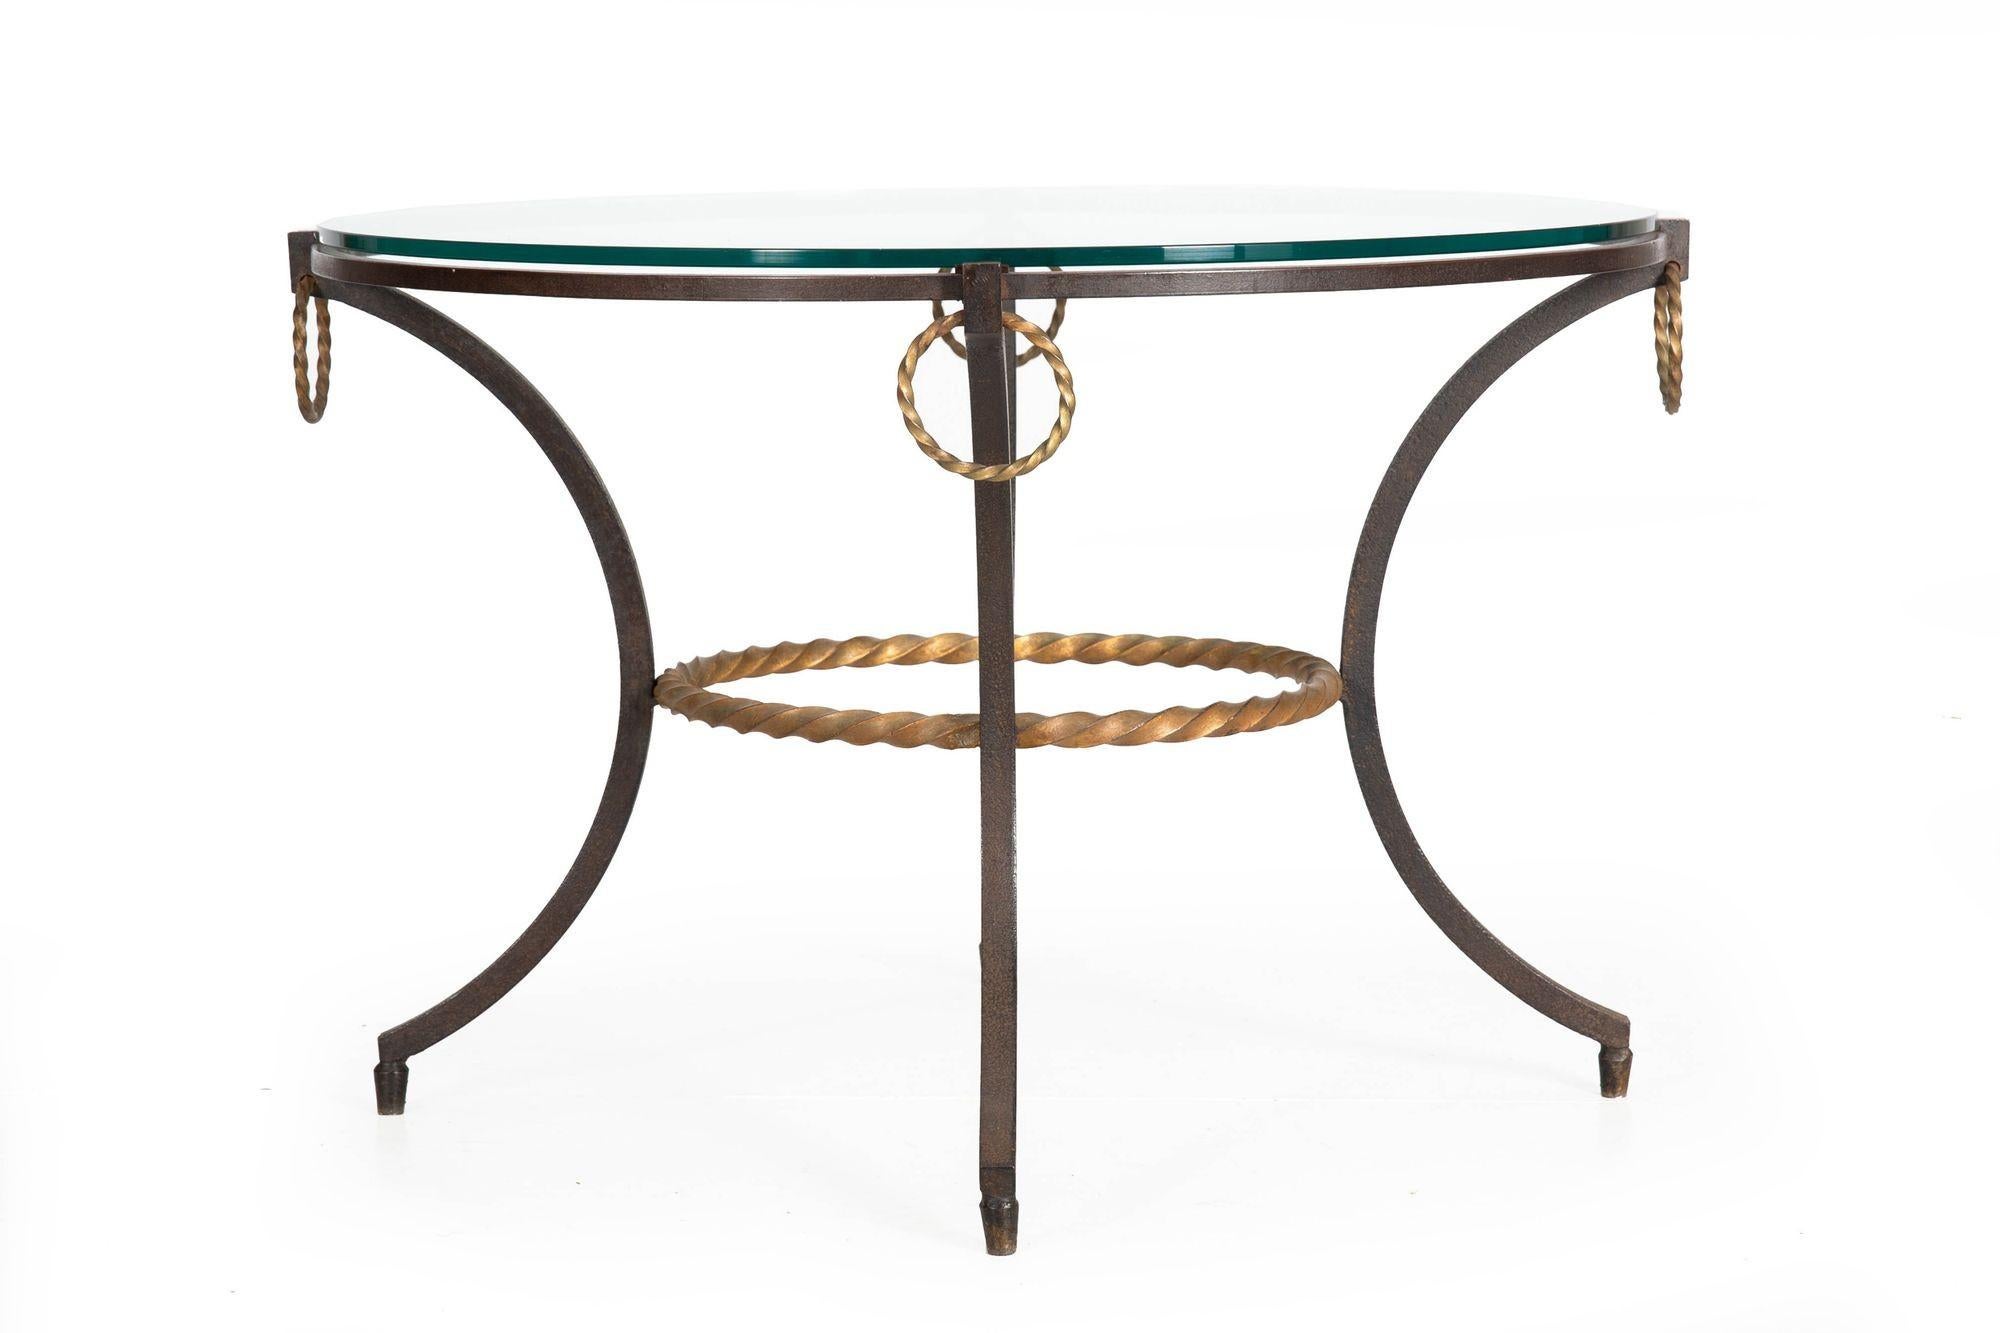 French Modernist Wrought-Iron & Glass Cocktail Side Coffee Table ca. 1950s In Good Condition For Sale In Shippensburg, PA